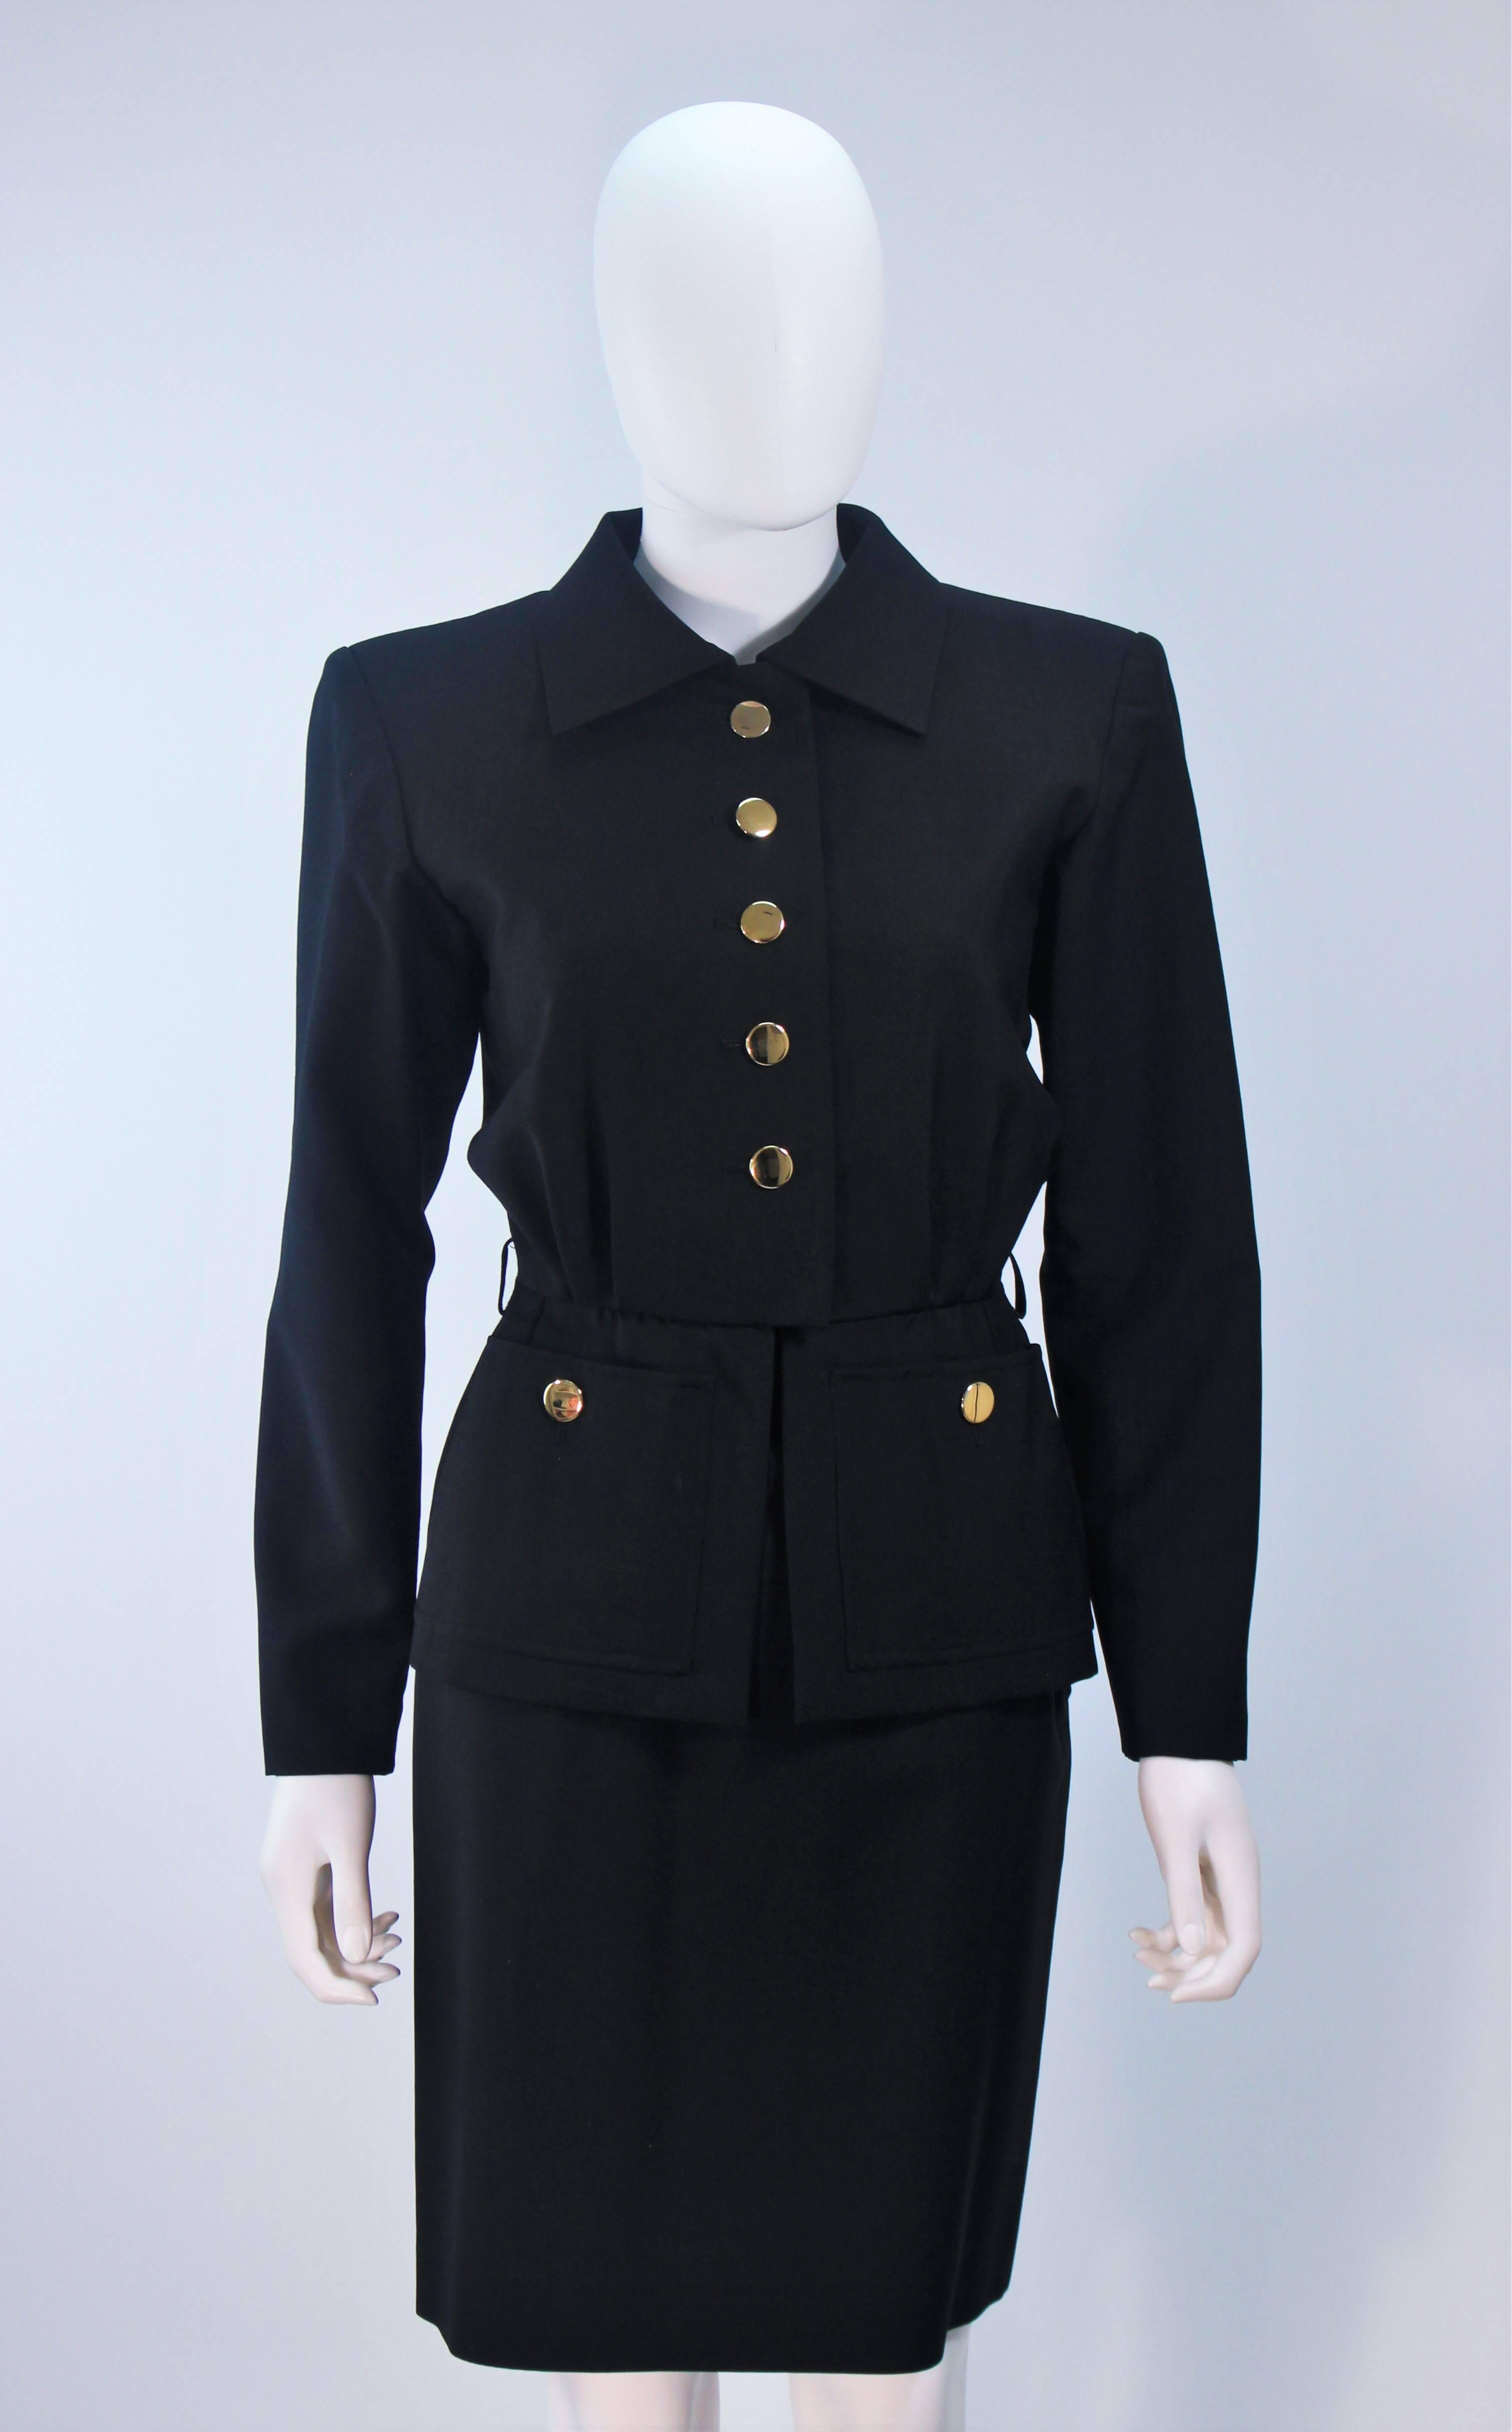  This Yves Saint Laurent skirt suit is composed of a black wool and mohair blend. The jacket features center front button closures with pockets and peplum style. The skirt has a side zipper closure. In excellent vintage condition. 

  **Please